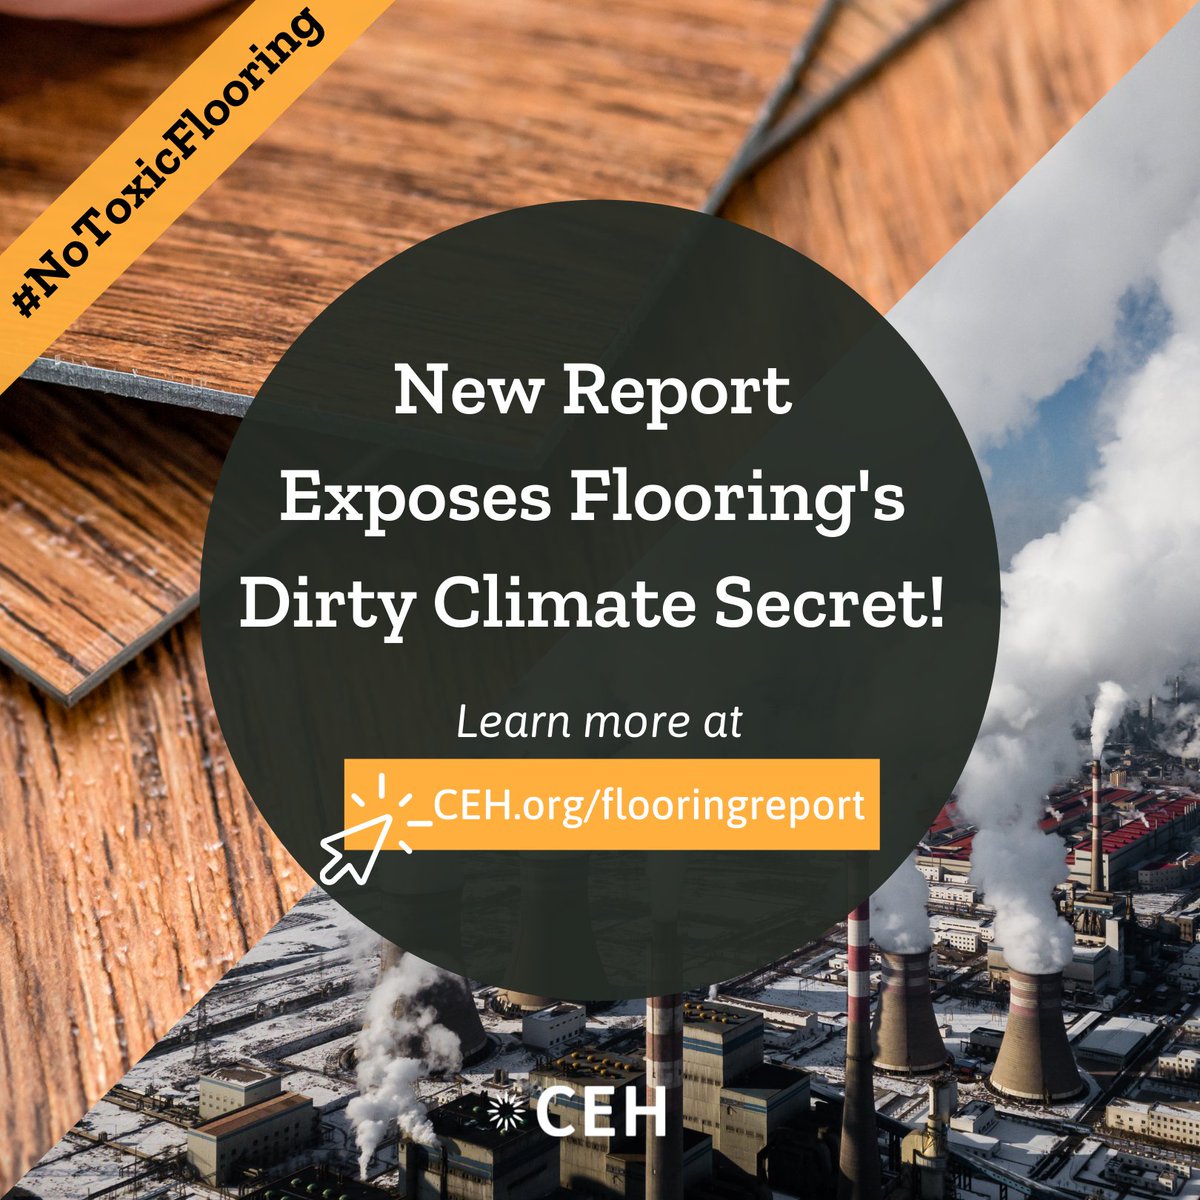 Did you know that flooring has a dirty climate secret?🤫 Luxury vinyl tile is simply PVC flooring, rebranded. And PVC is the #poisonplastic.☠️ 📔Our groundbreaking new report exposes the true health and climate cost of vinyl flooring. ceh.org/flooringreport #NoToxicFlooring